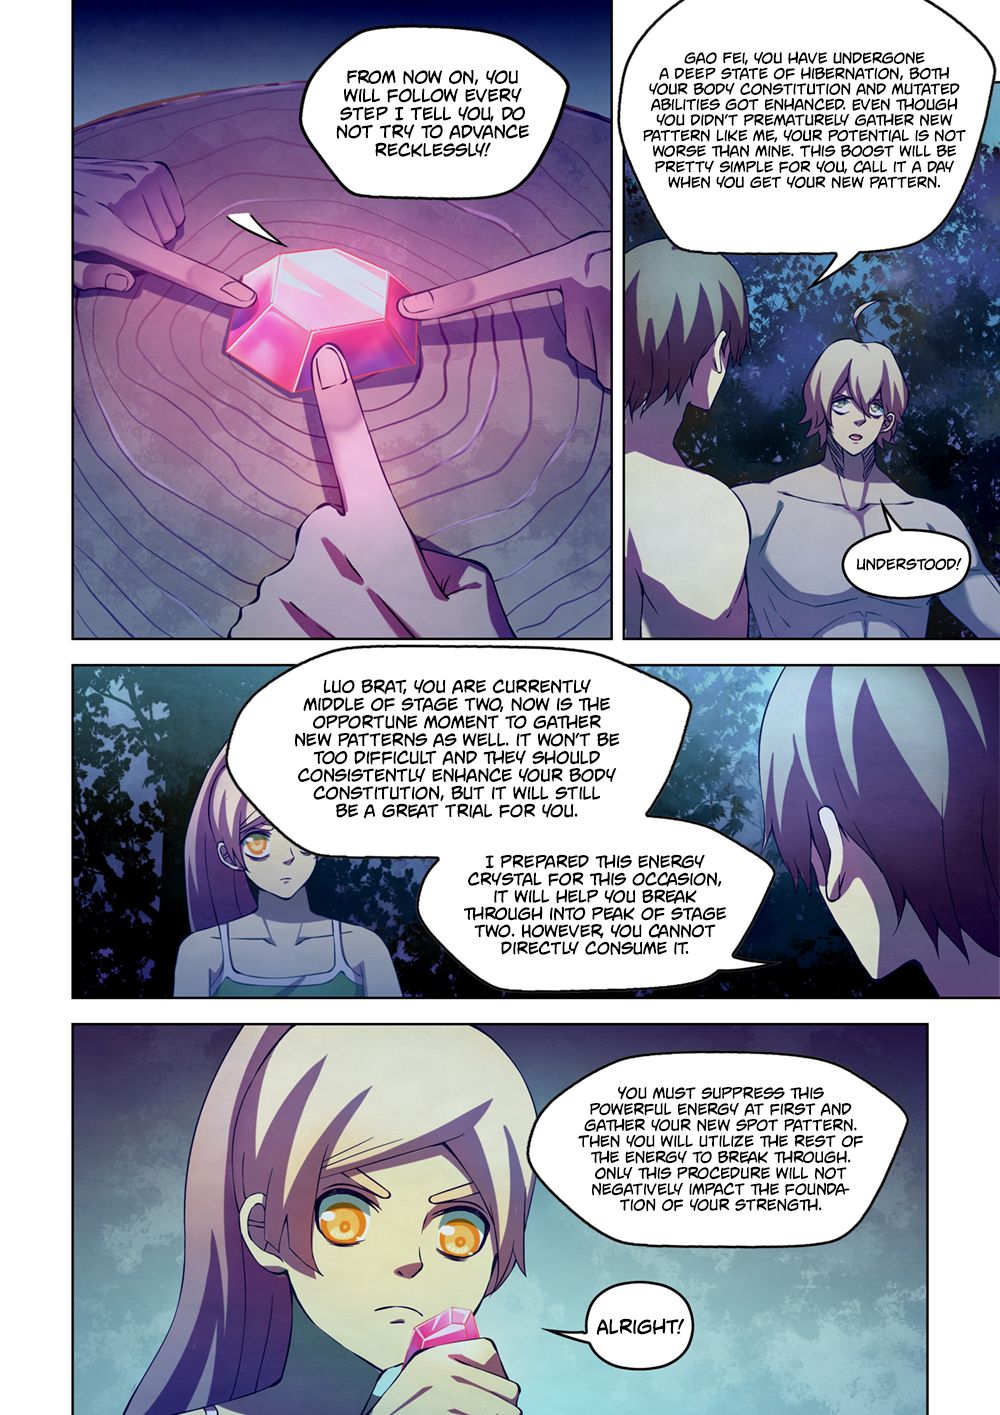 The Last Human Chapter 196 Page 14